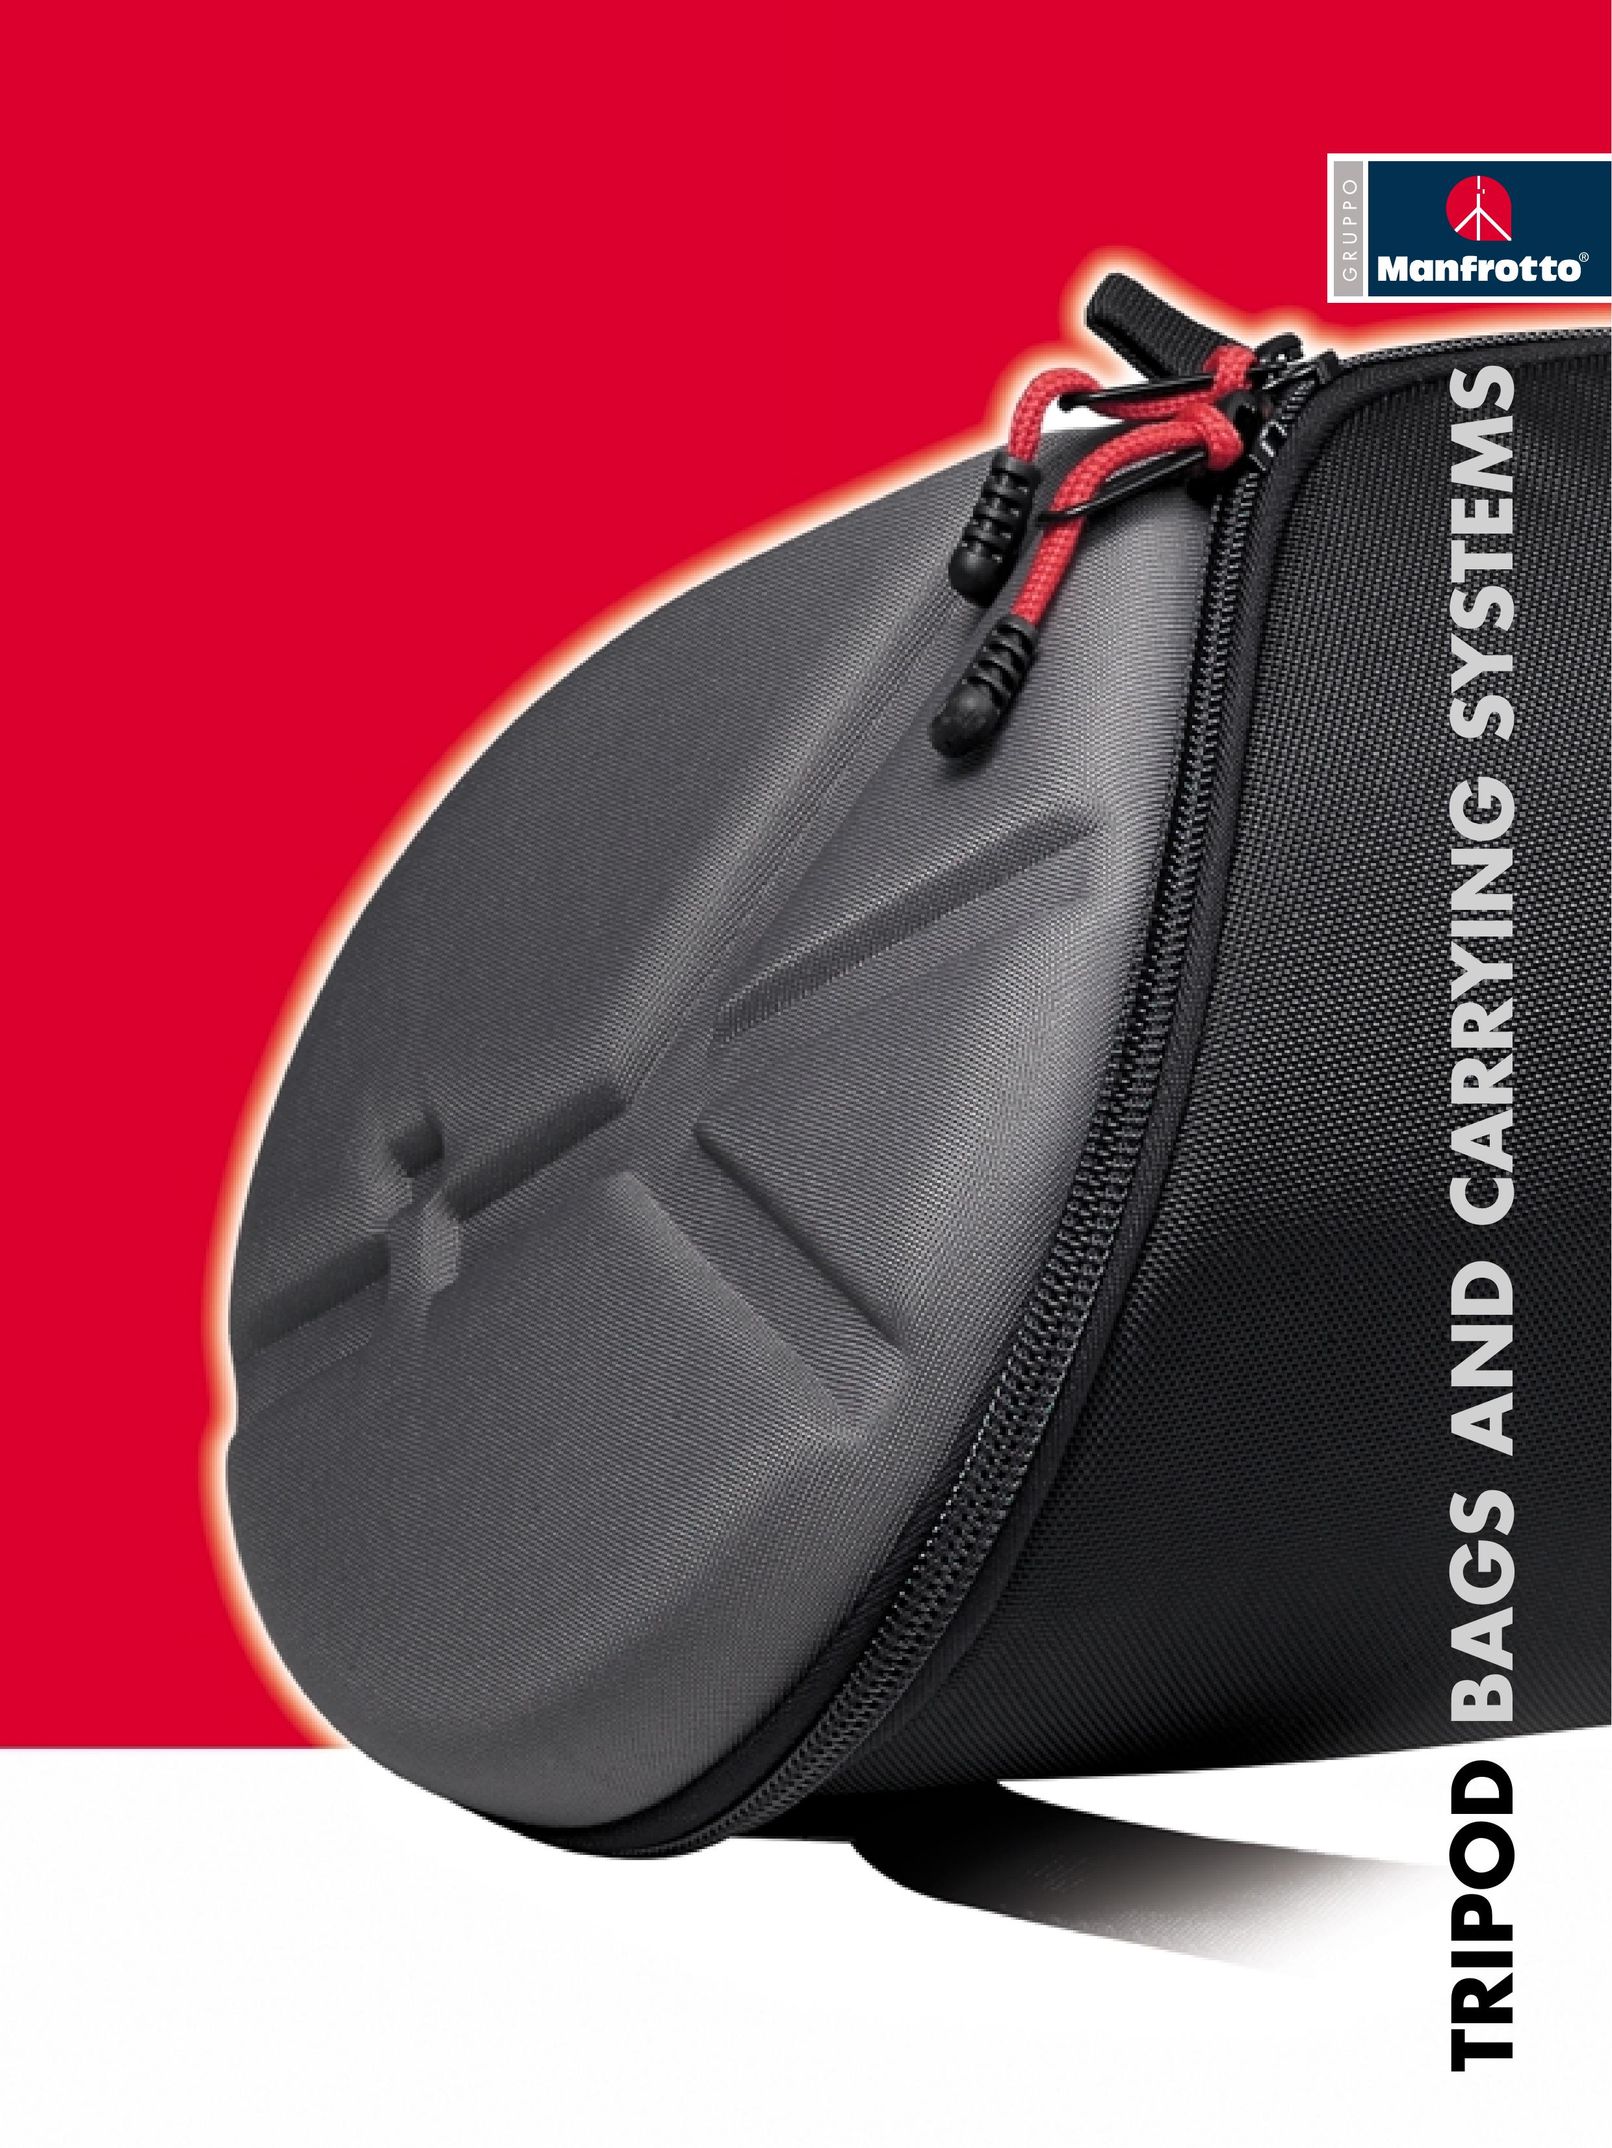 Manfrotto MBAG100P Carrying Case User Manual